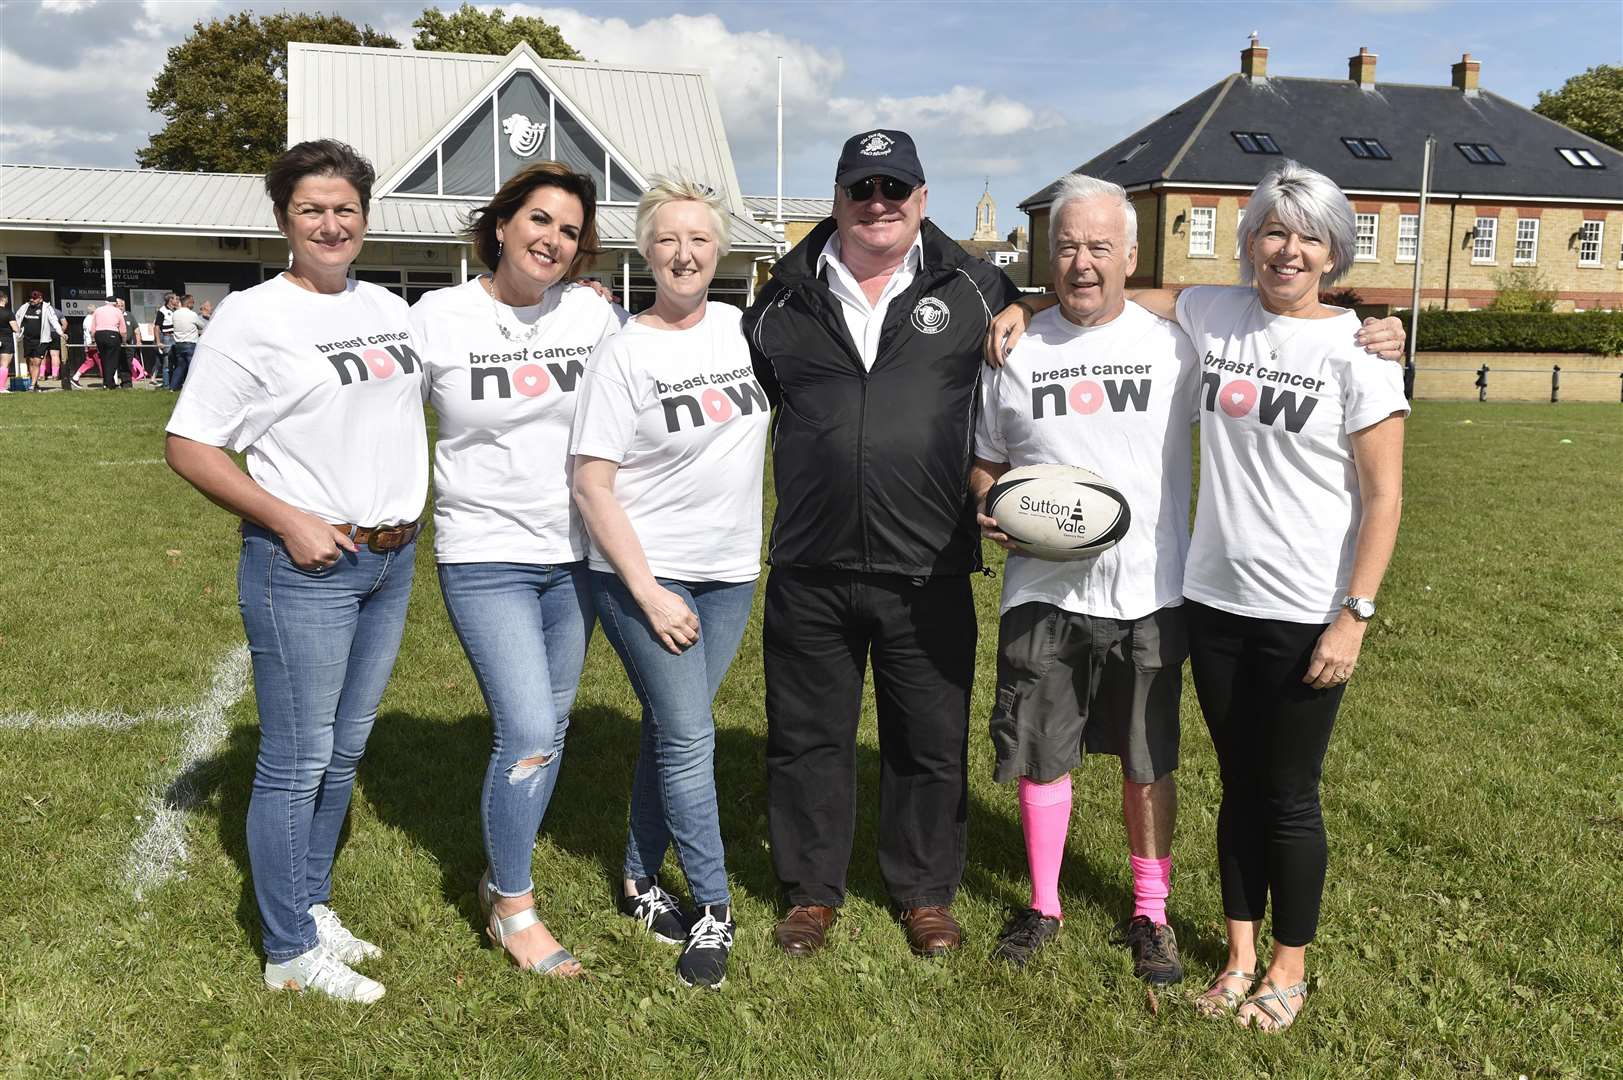 Mandee Castle and Chantele Rashbrook helped organise a pink socks rugby game in aid of Breast Cancer Now